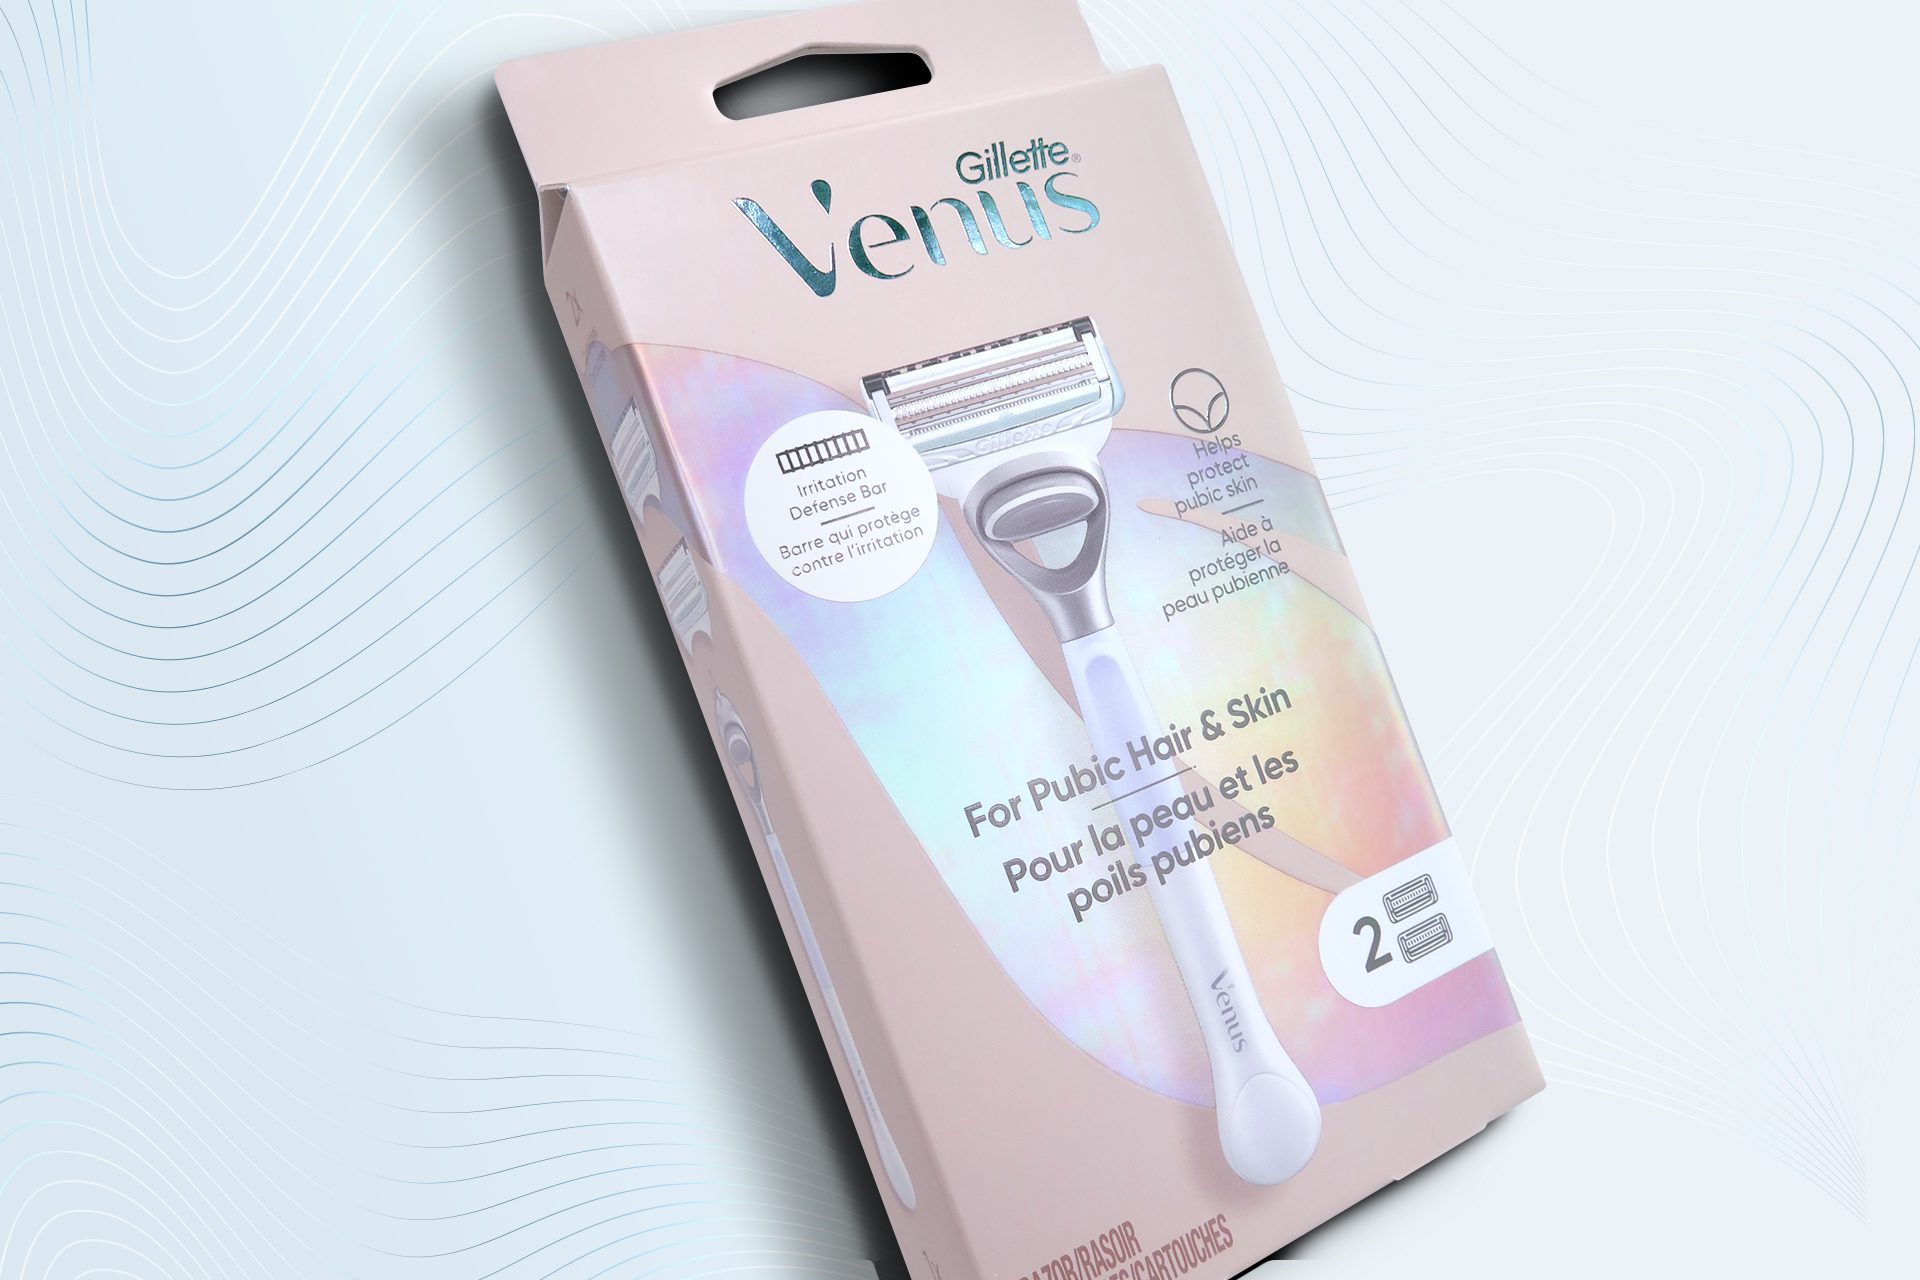 Product photography of a venus pubic hair razor, showcasing packaging design services for consumer packaged goods.